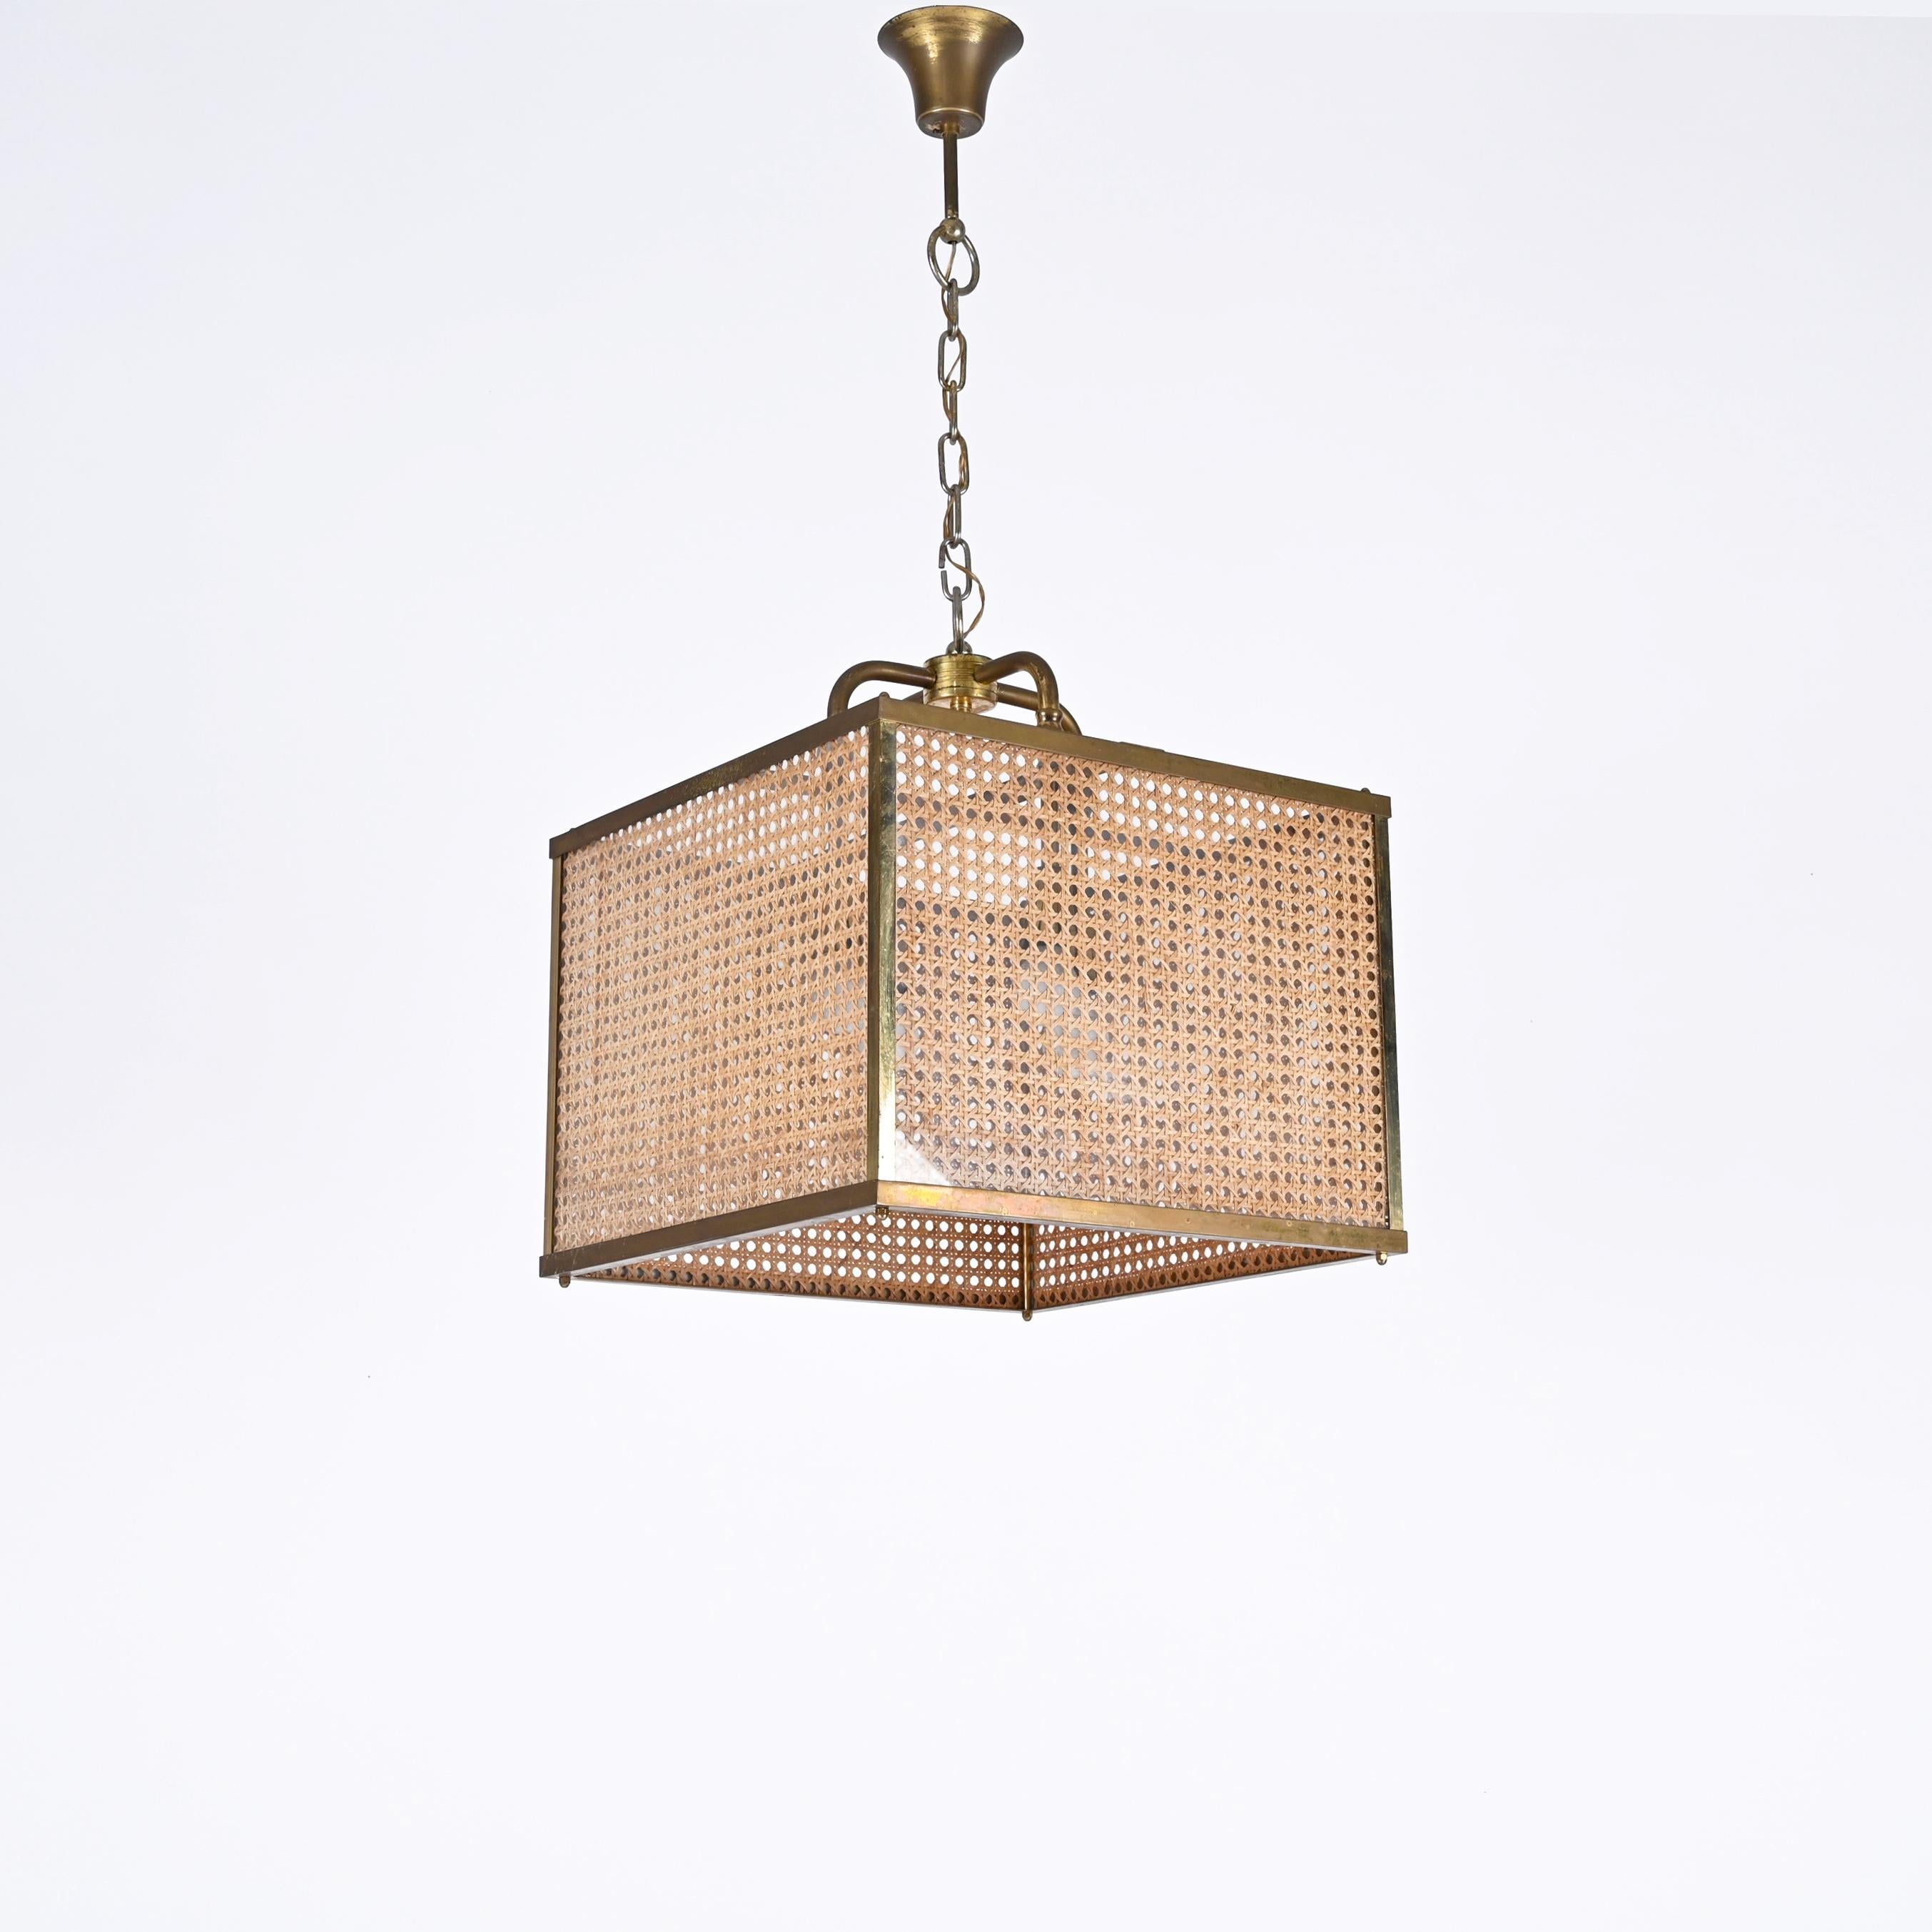 Italian Brass, Vienna Straw Wicker and Glass Square Chandelier Lamp, Italy, 1950s For Sale